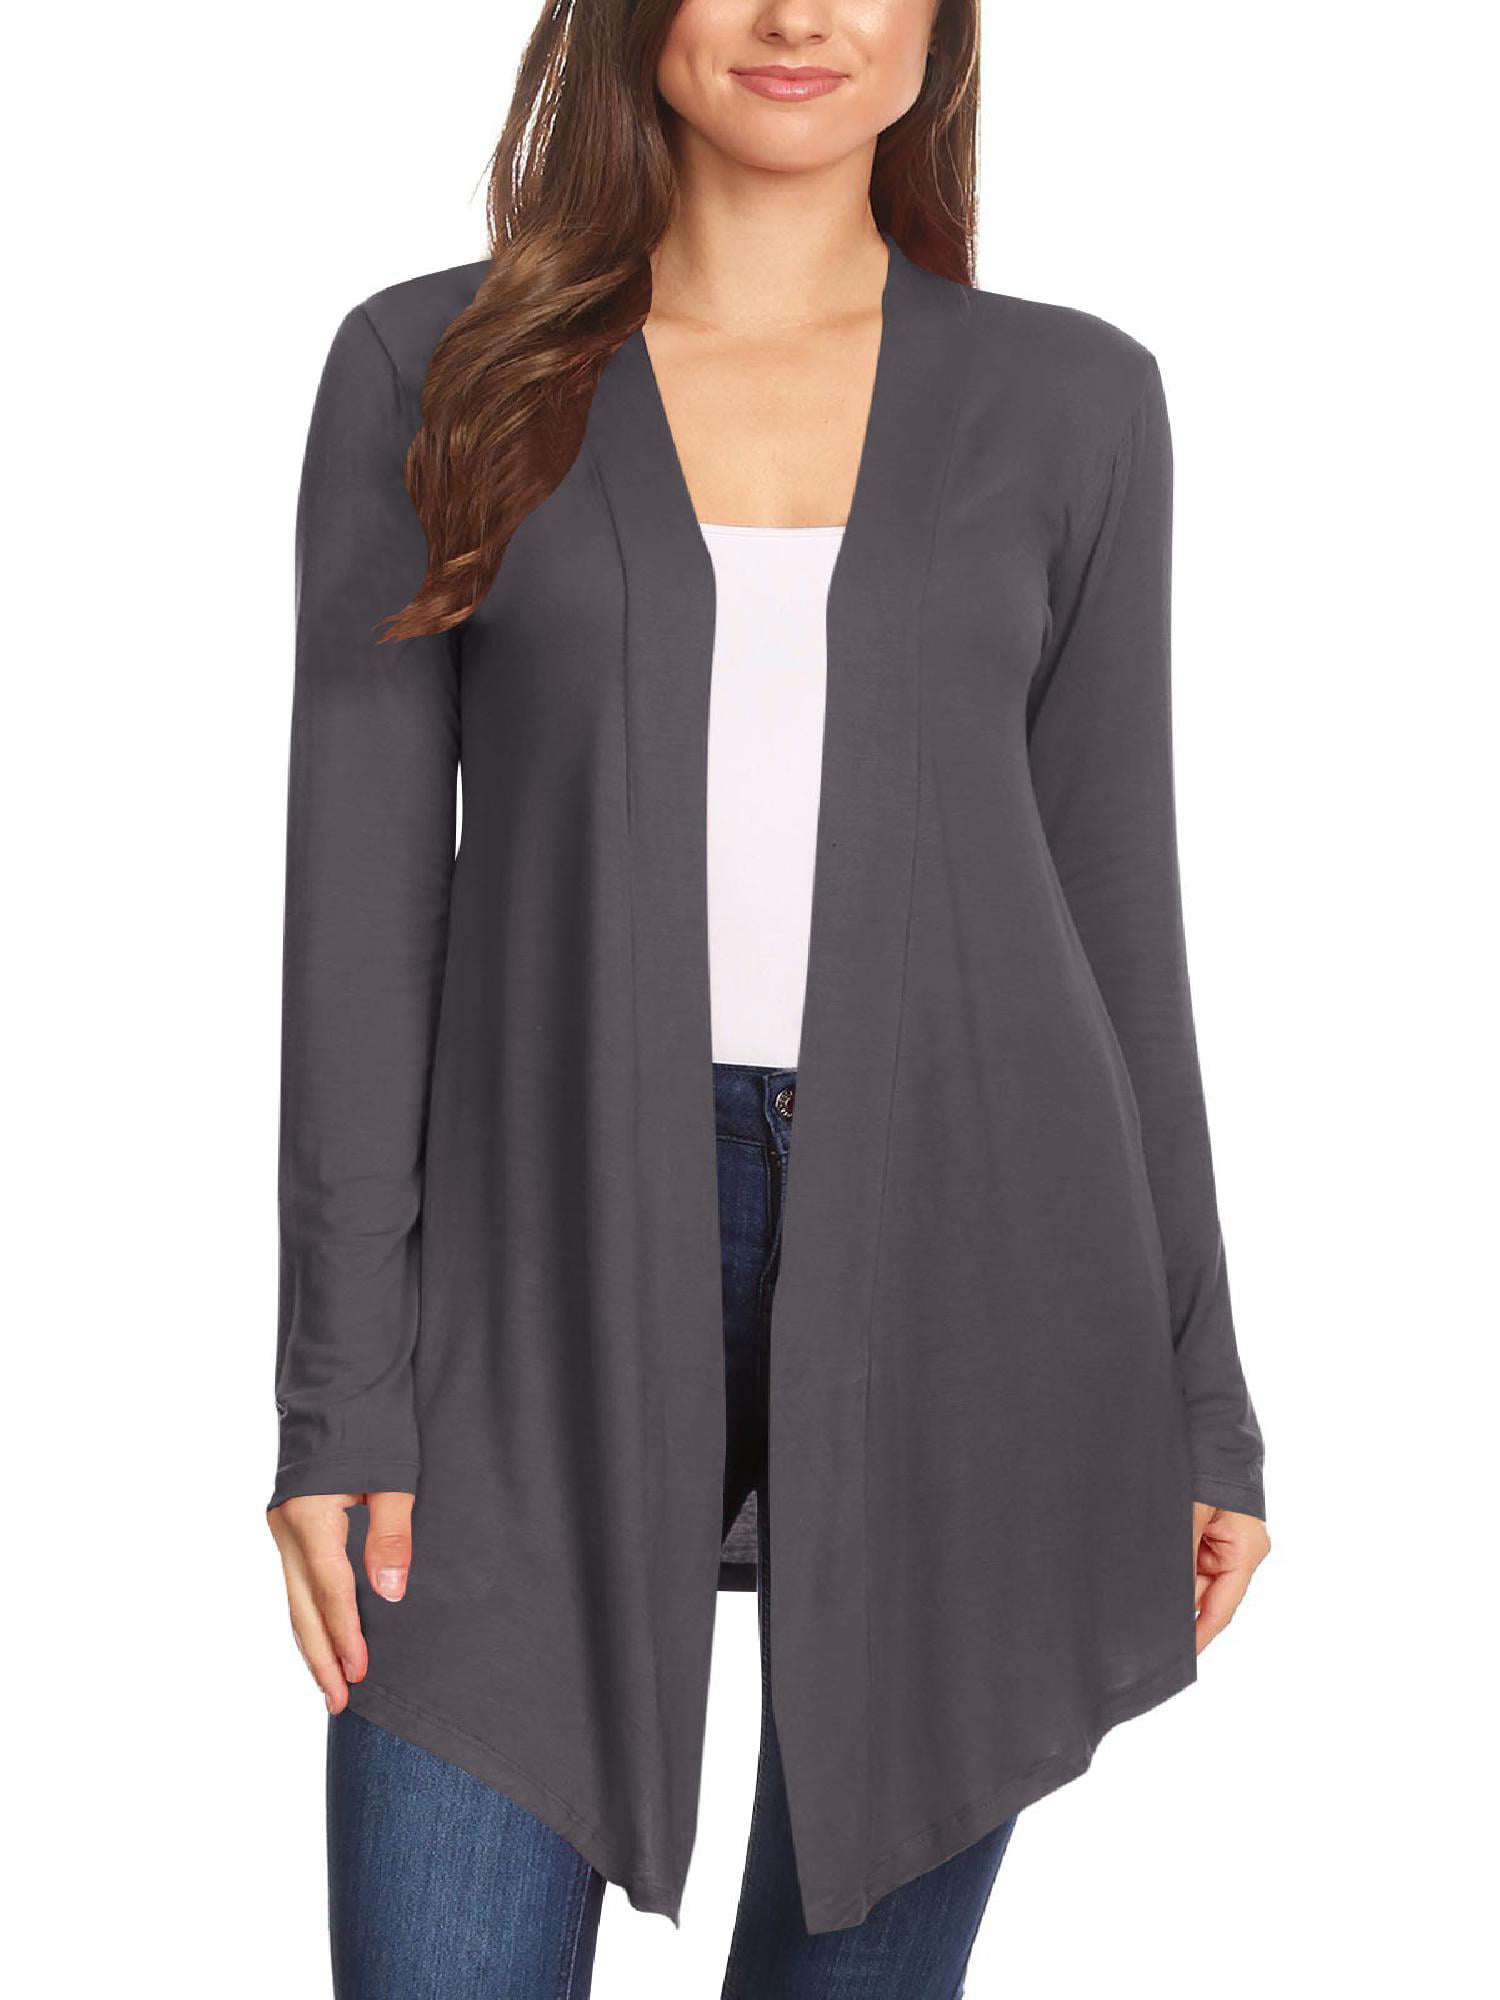 Women's Lightweight Casual Open Front Long Sleeve Solid Cardigan Office ...